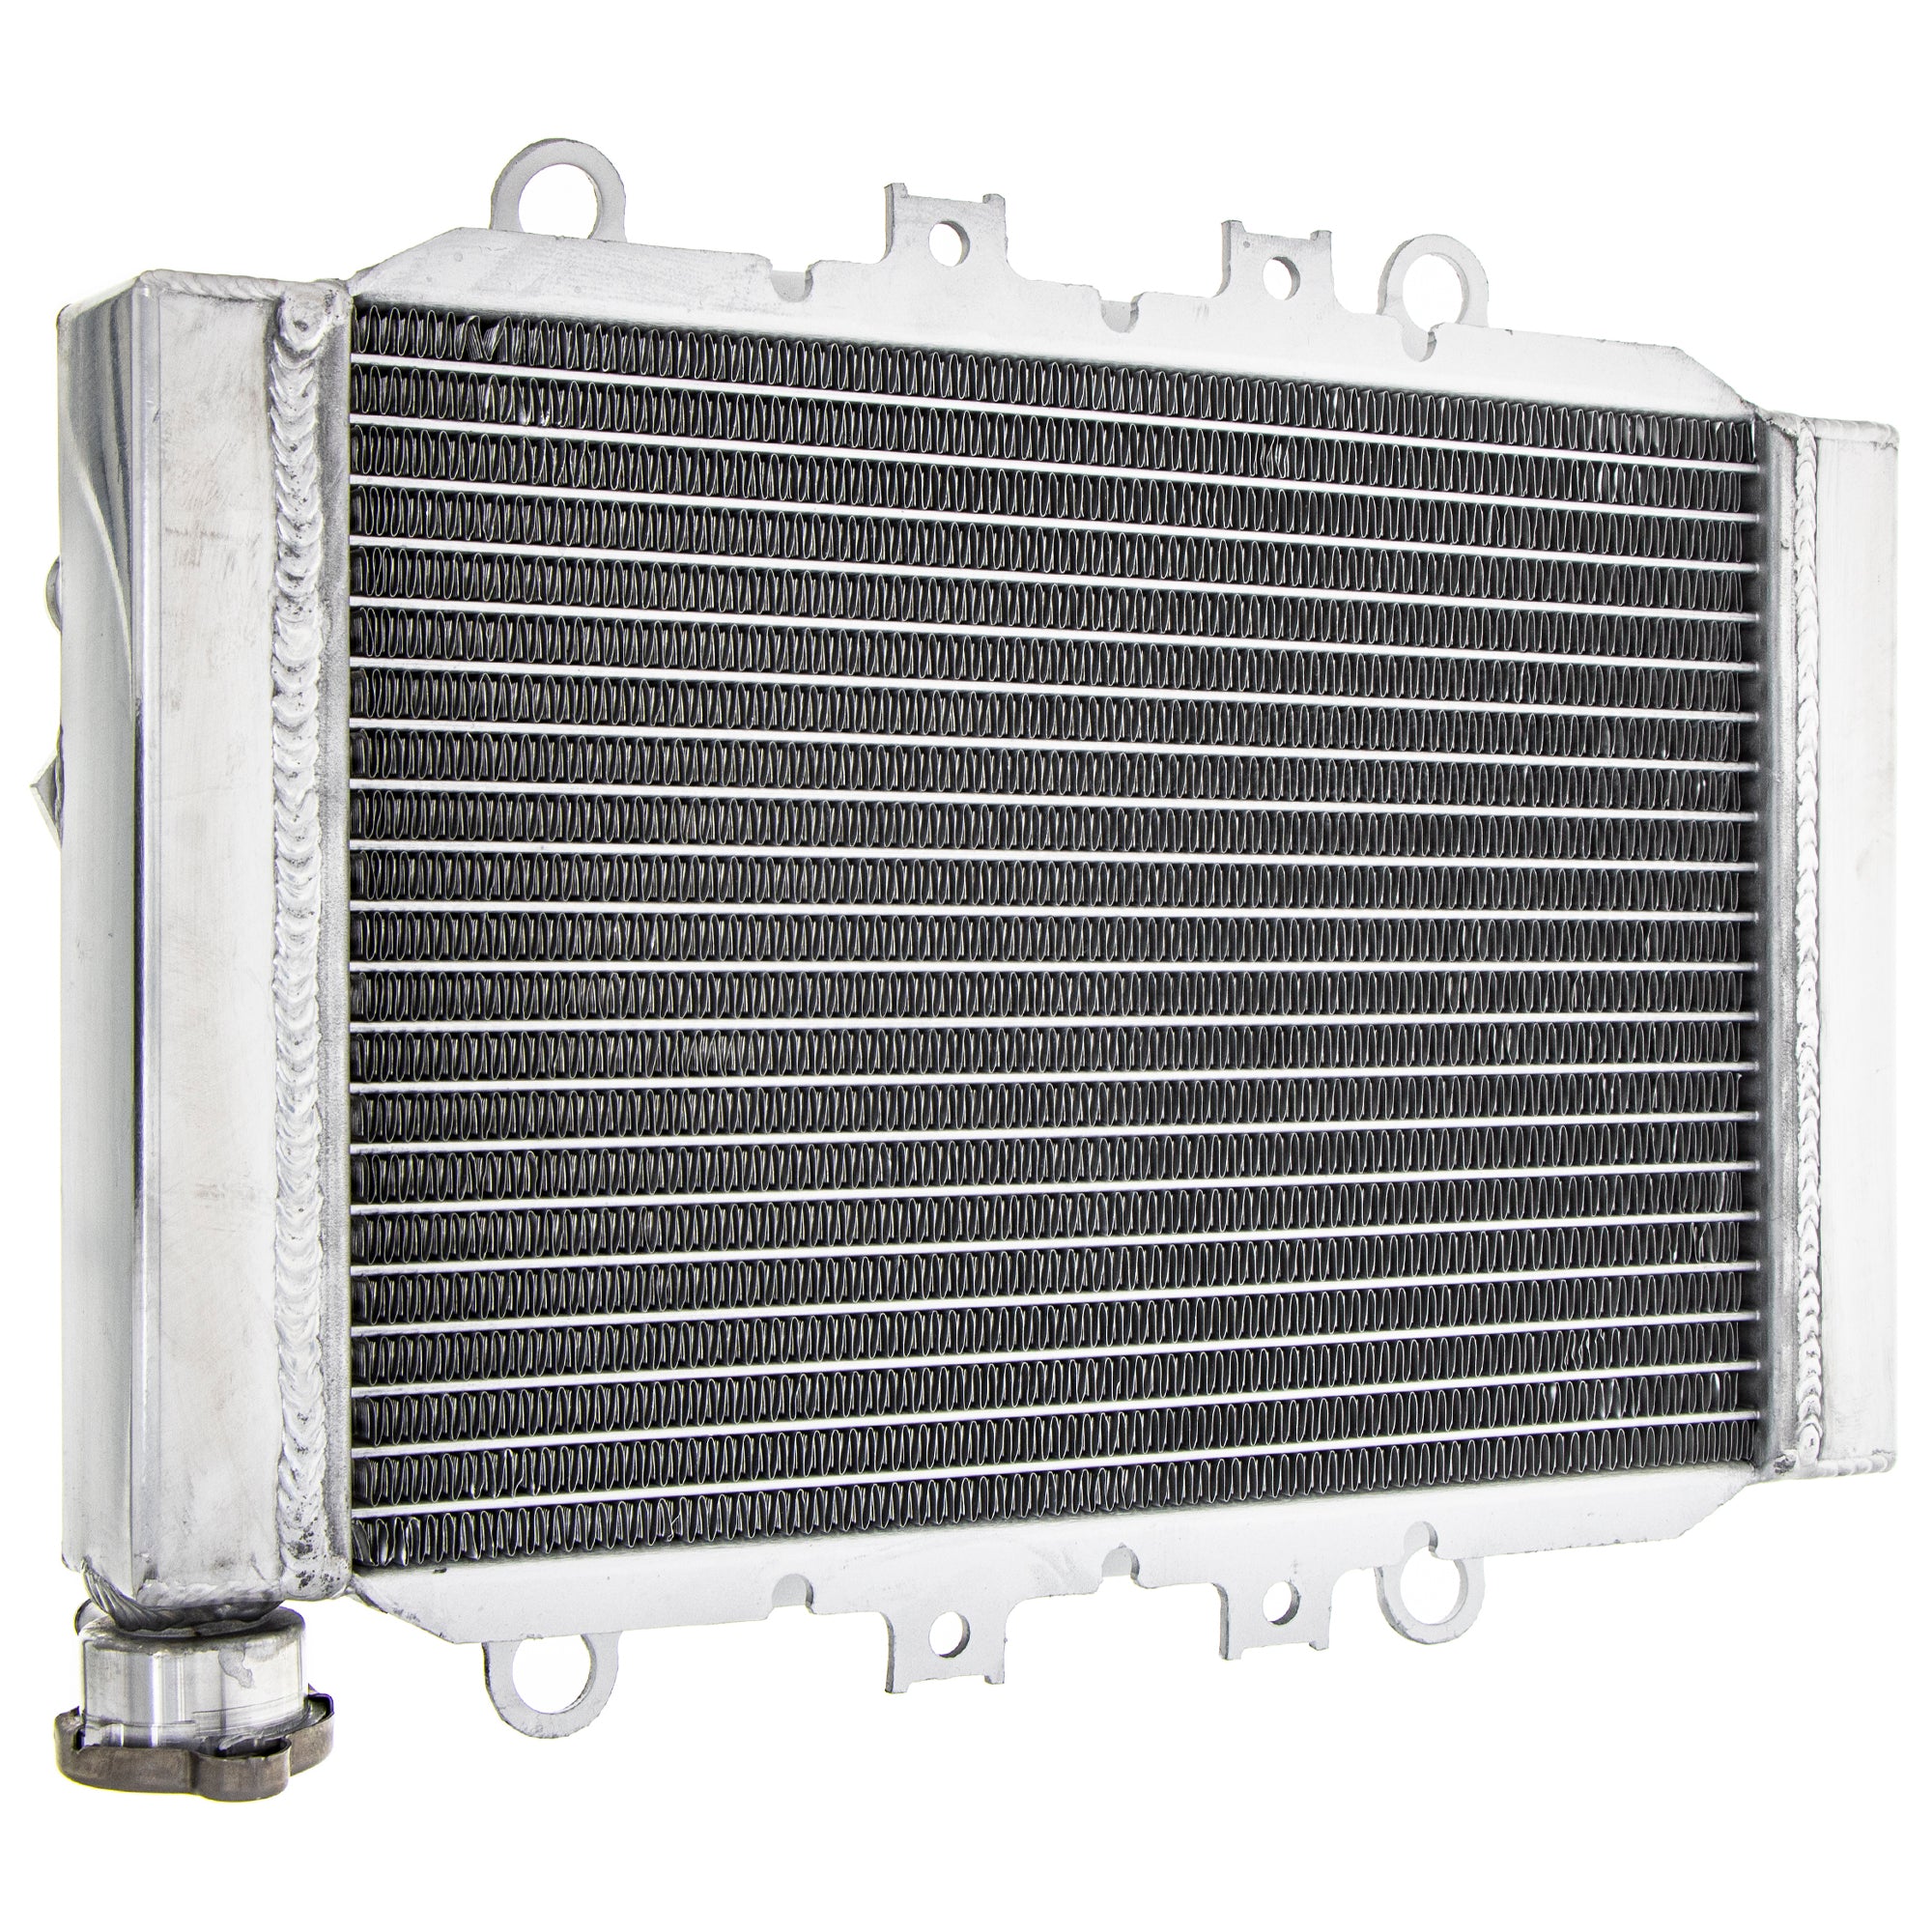 NICHE 519-CRD2259A High Capacity Radiator for zOTHER Kodiak Grizzly